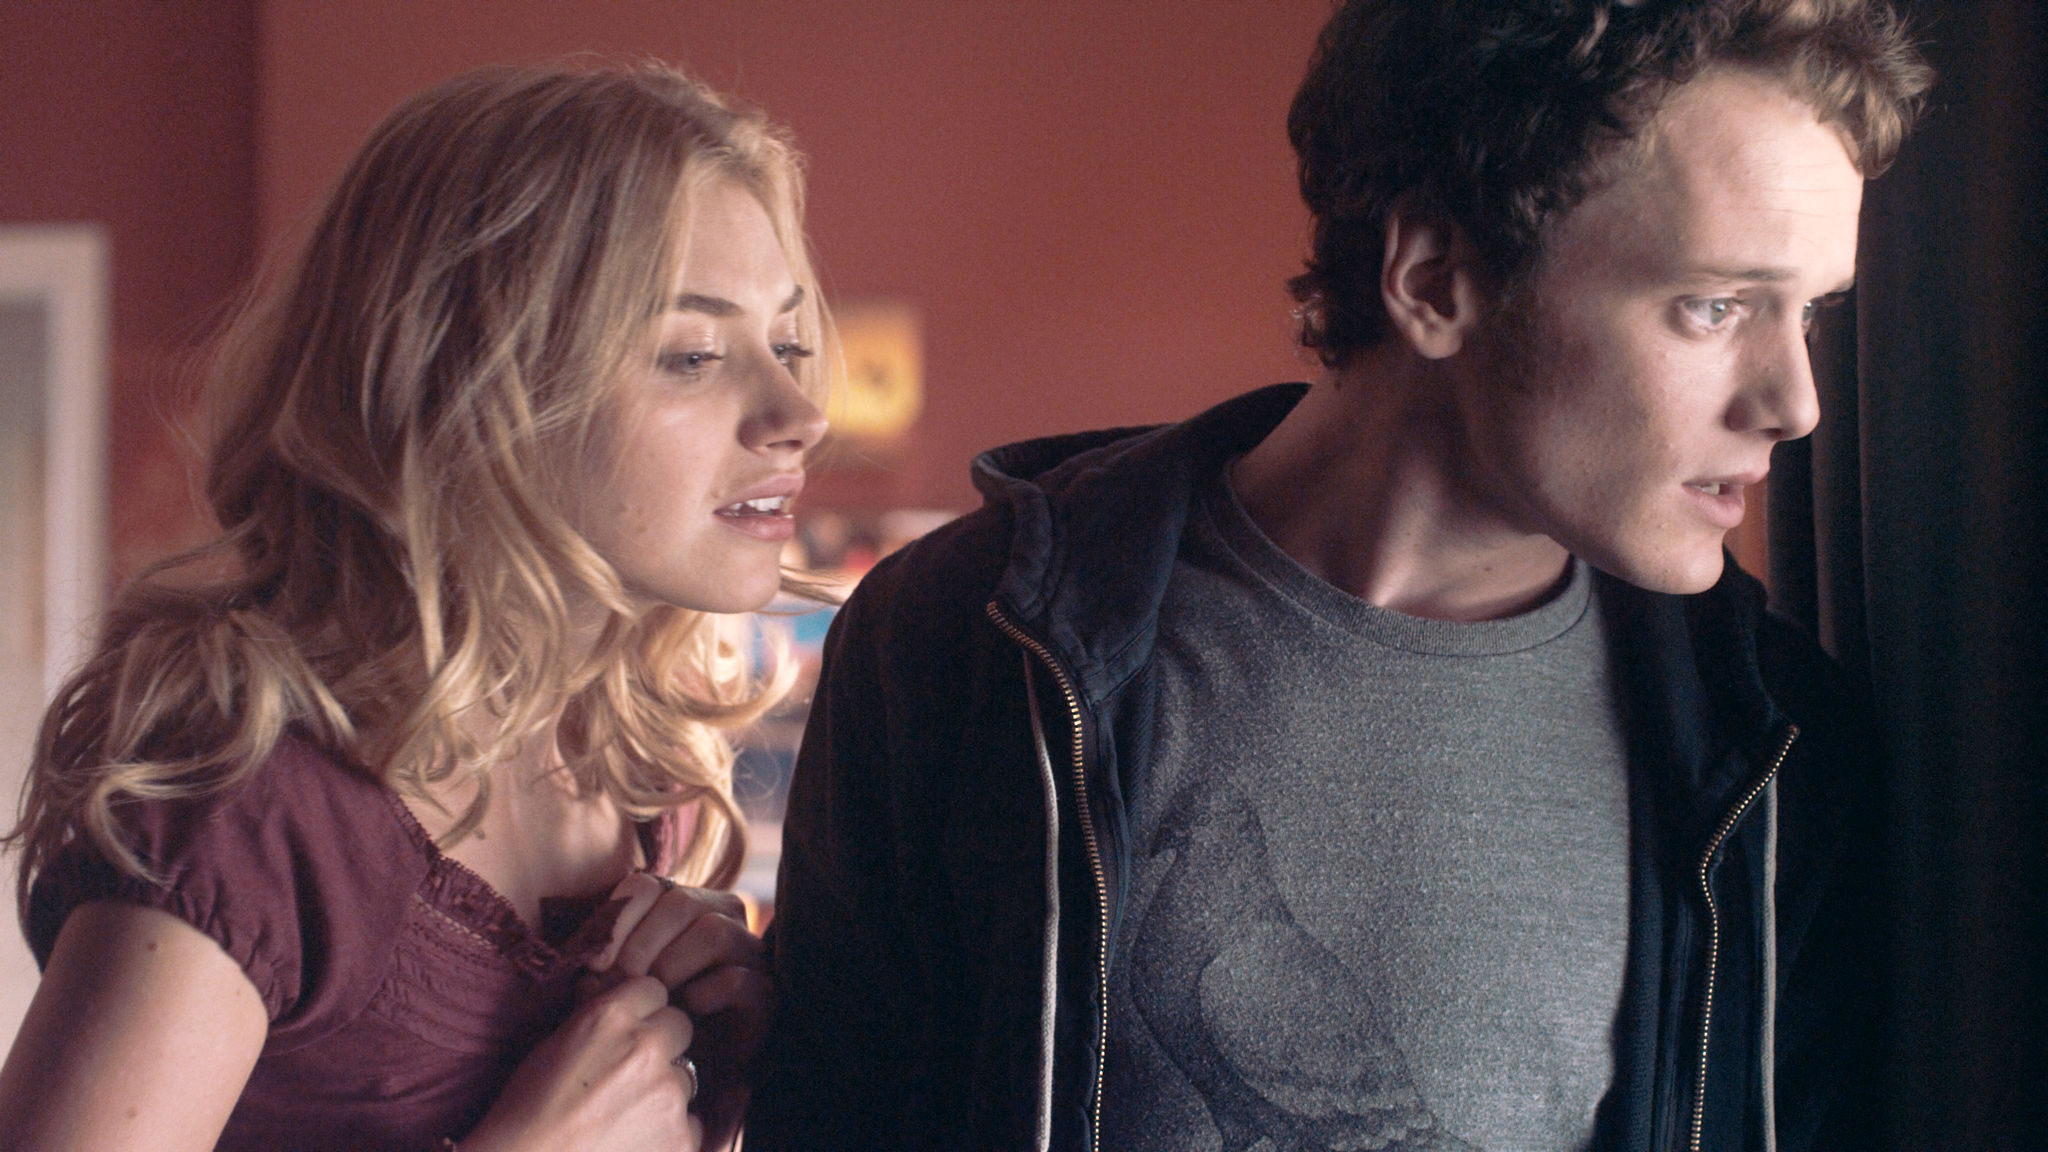 Imogen Poots stars as Amy Peterson and Anton Yelchin stars as Charley Brewster in DreamWorks SKG's Fright Night (2011)